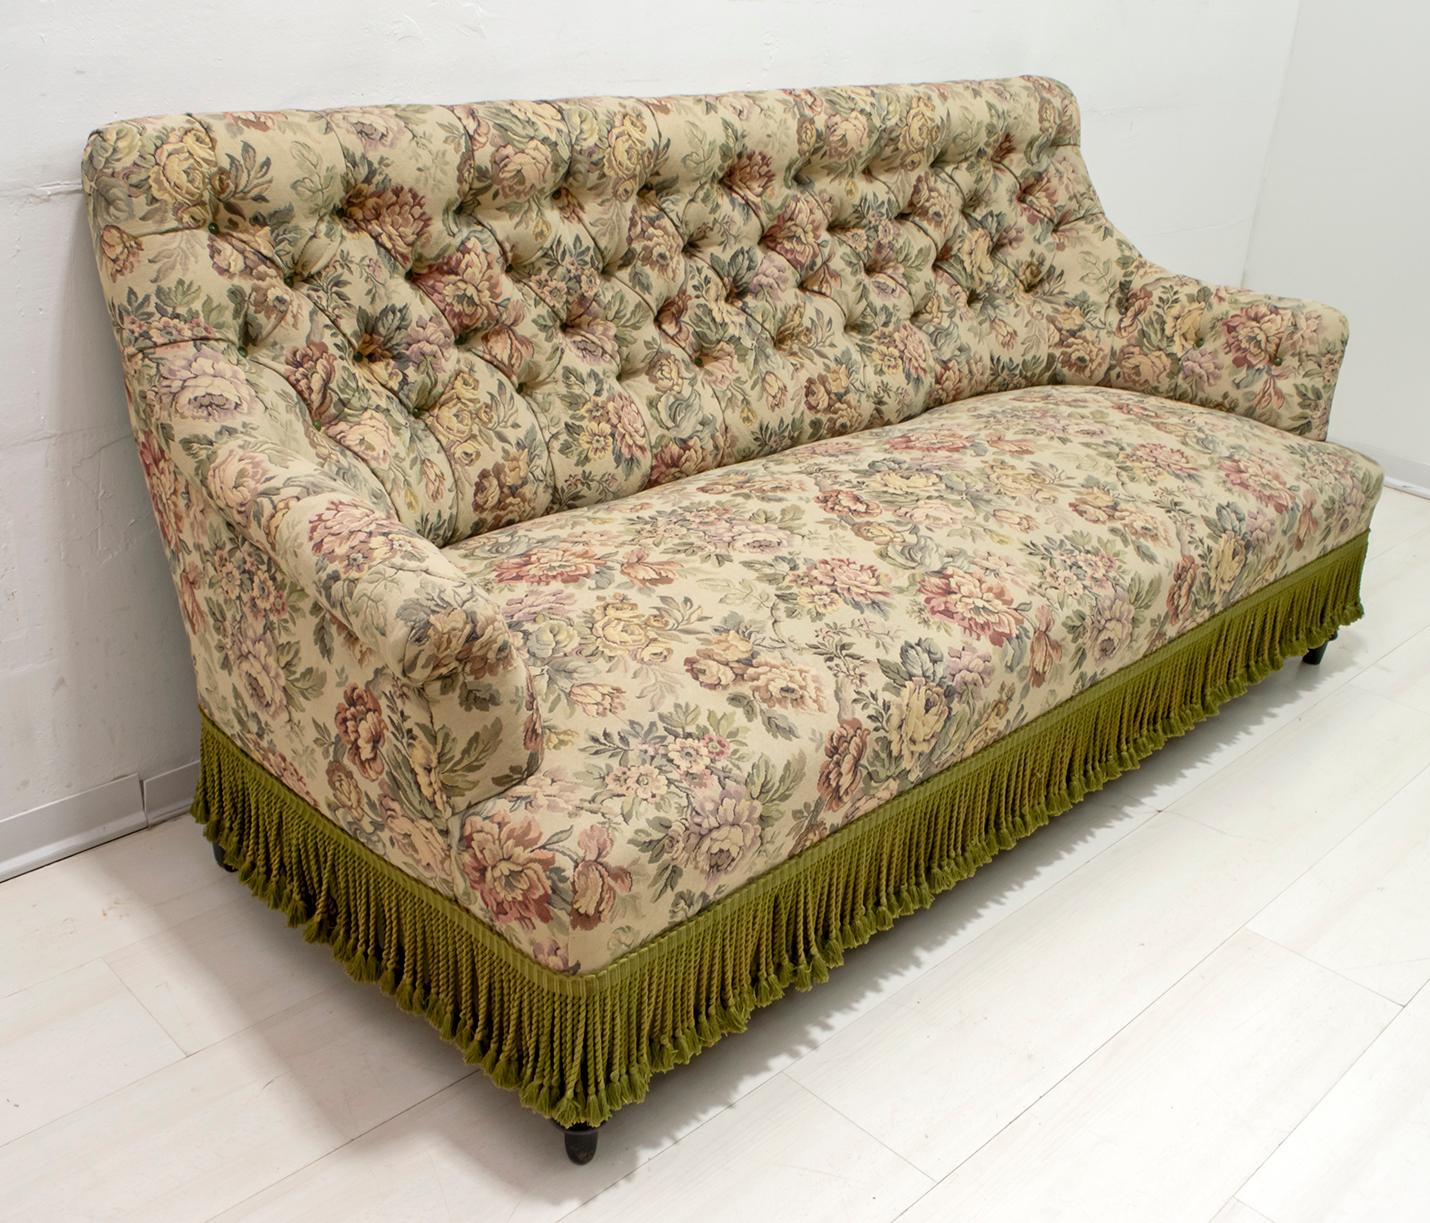 Sofa from the 19th century, Napoleon III period, original Gobelin upholstery, normal wear but in excellent condition, France, 1870

Armchair sizes:
H cm 80 x W cm 70 x D cm 72 x SH cm 40.
  